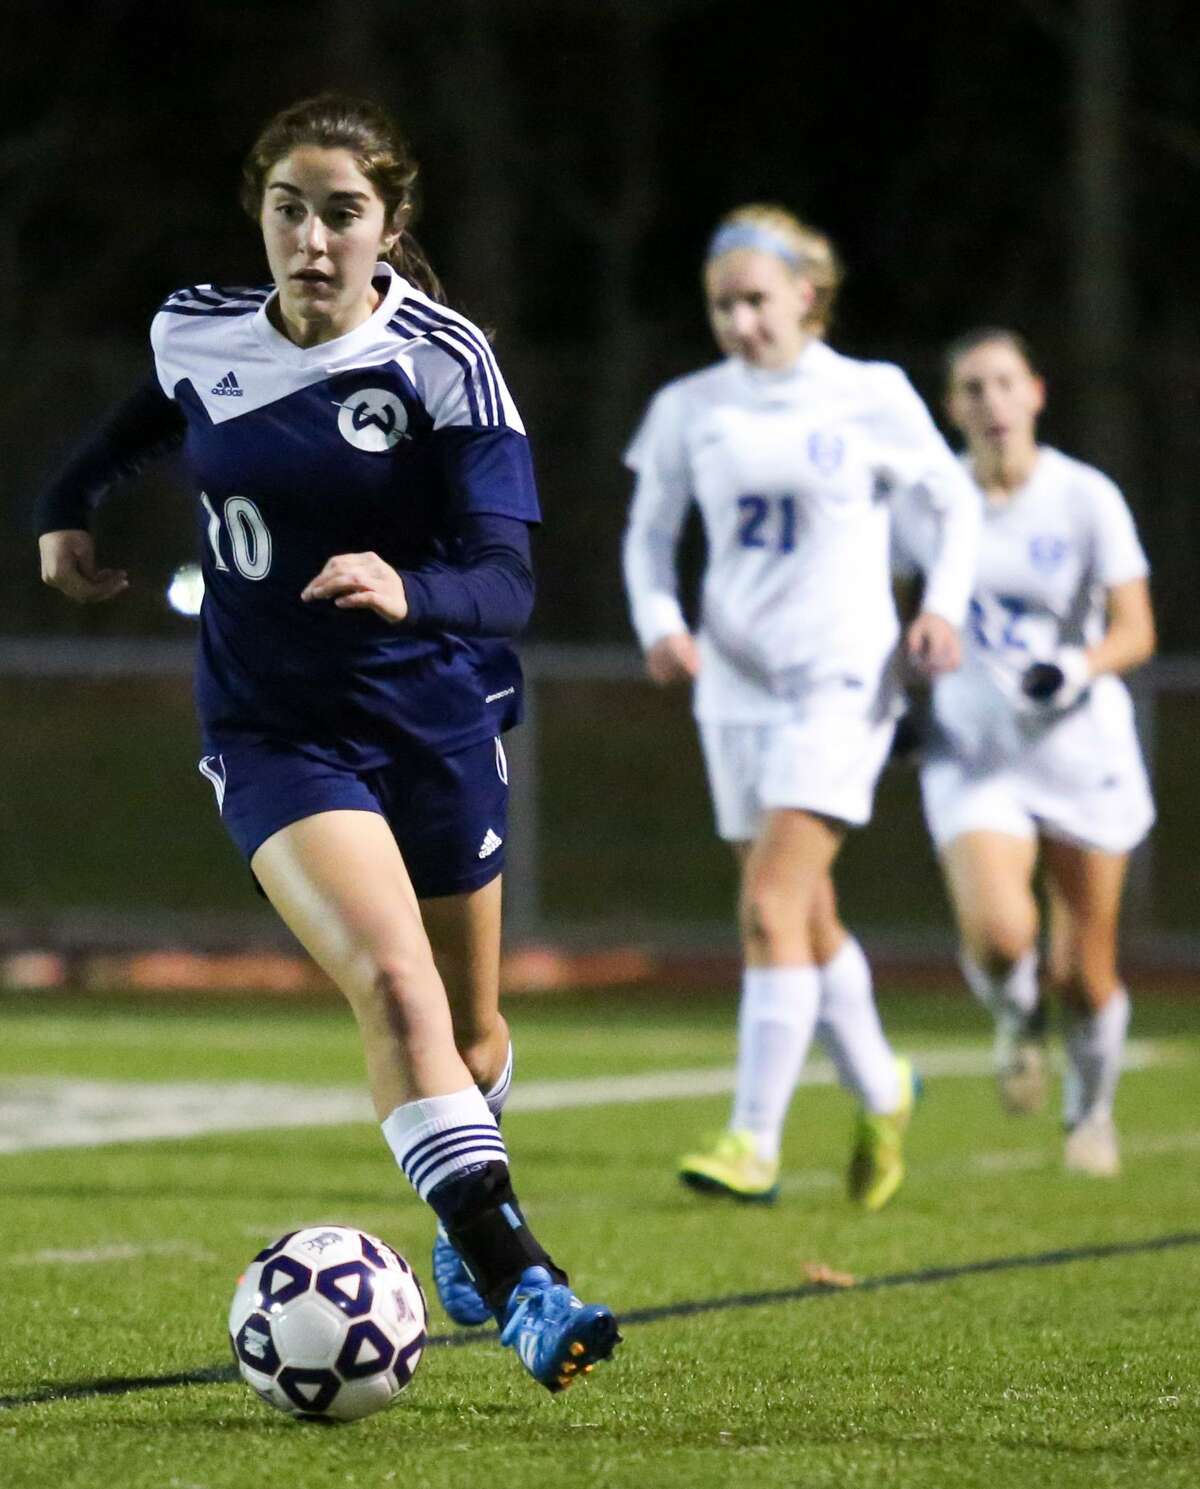 Wilton's Zoe Lash keeps the ball from Glastonbury defense during the Class LL girls soccer semifinals in West Haven, Conn. on Wednesday, November 16, 2016.